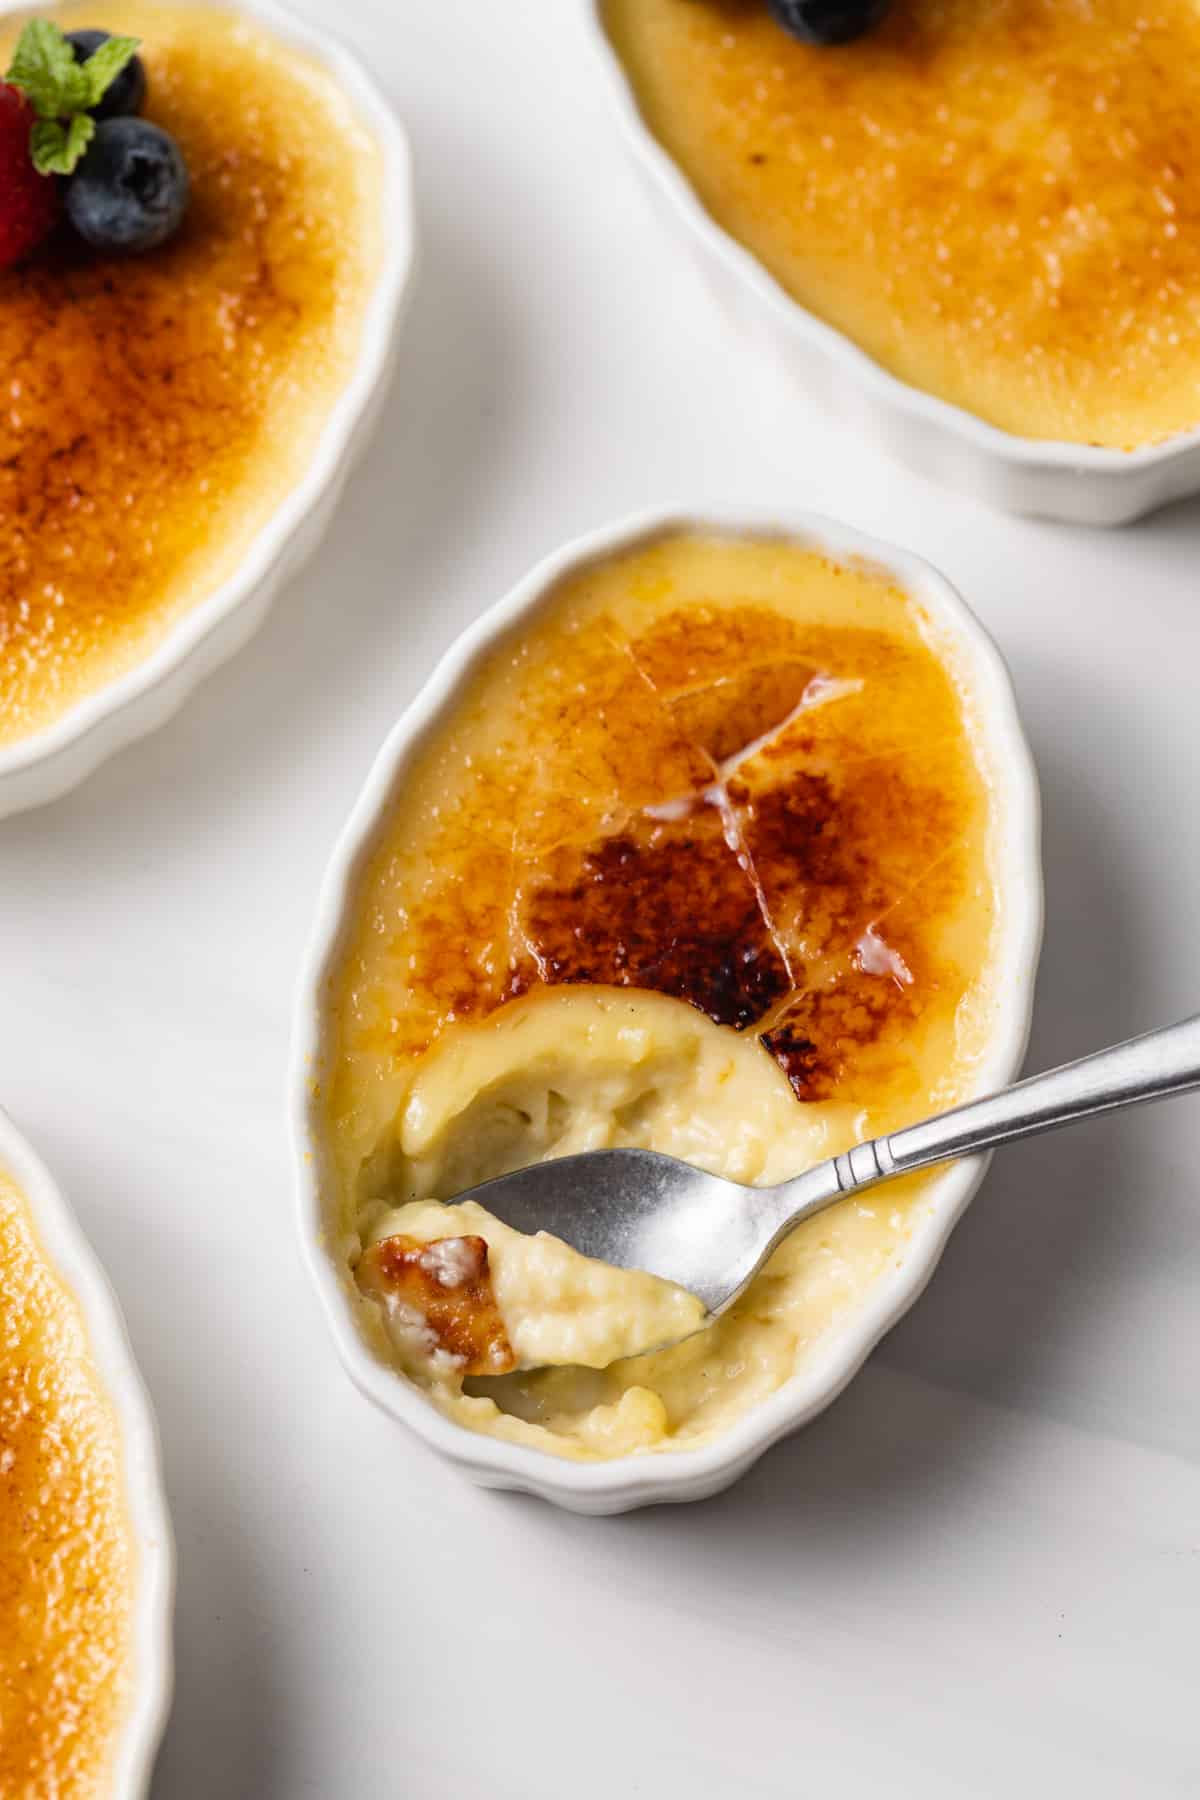 spoon taking out a bite of creme brulee